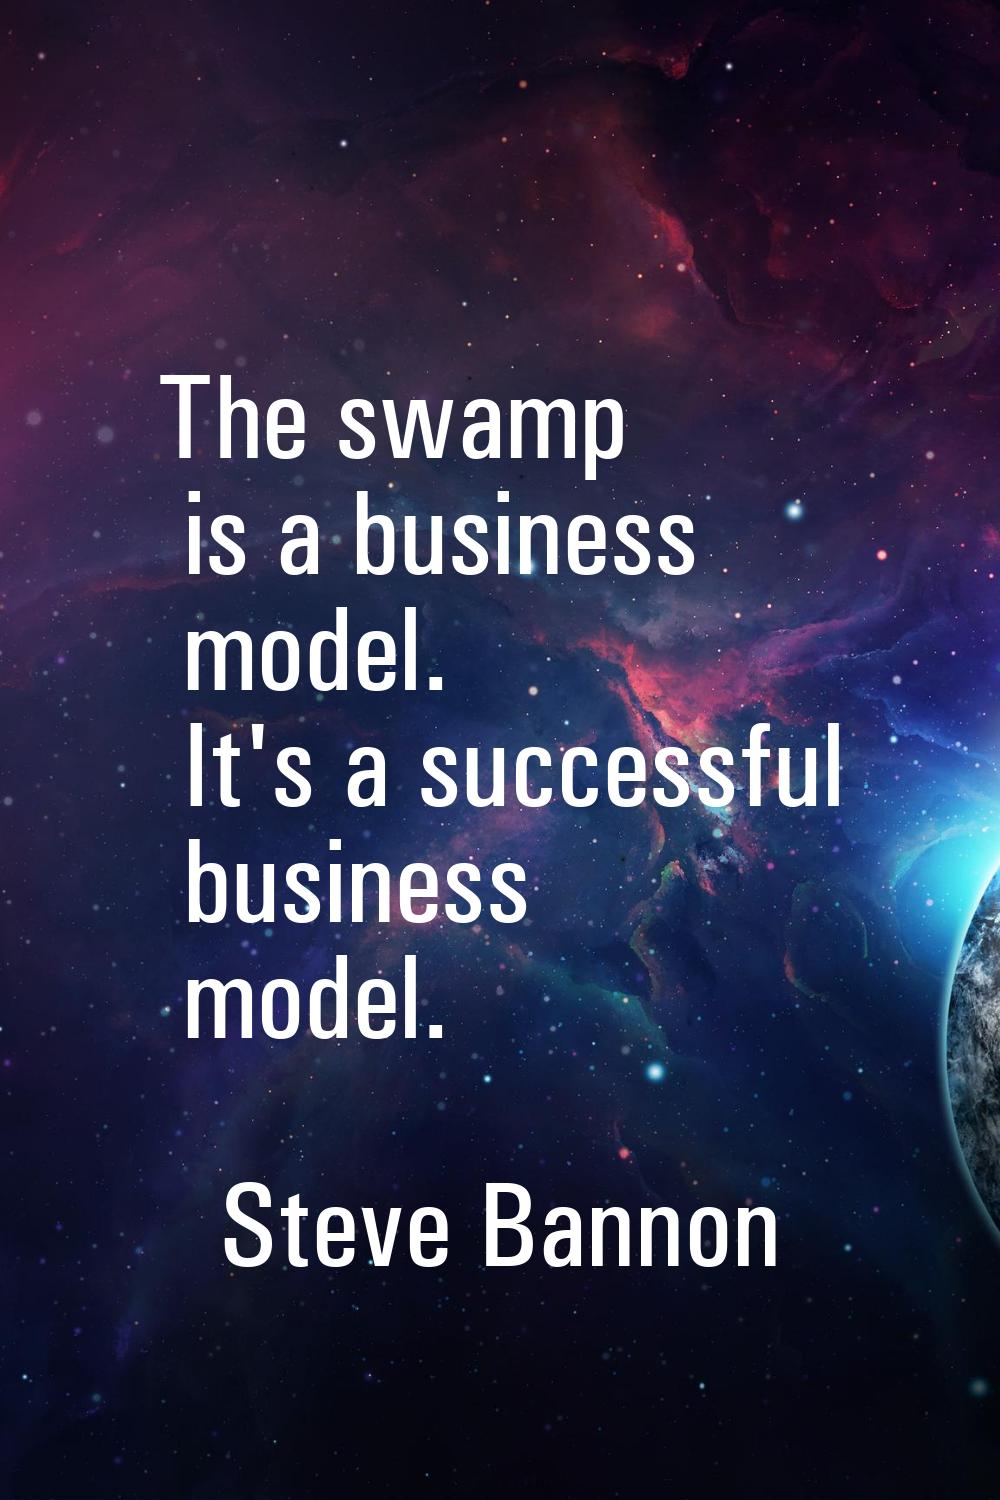 The swamp is a business model. It's a successful business model.